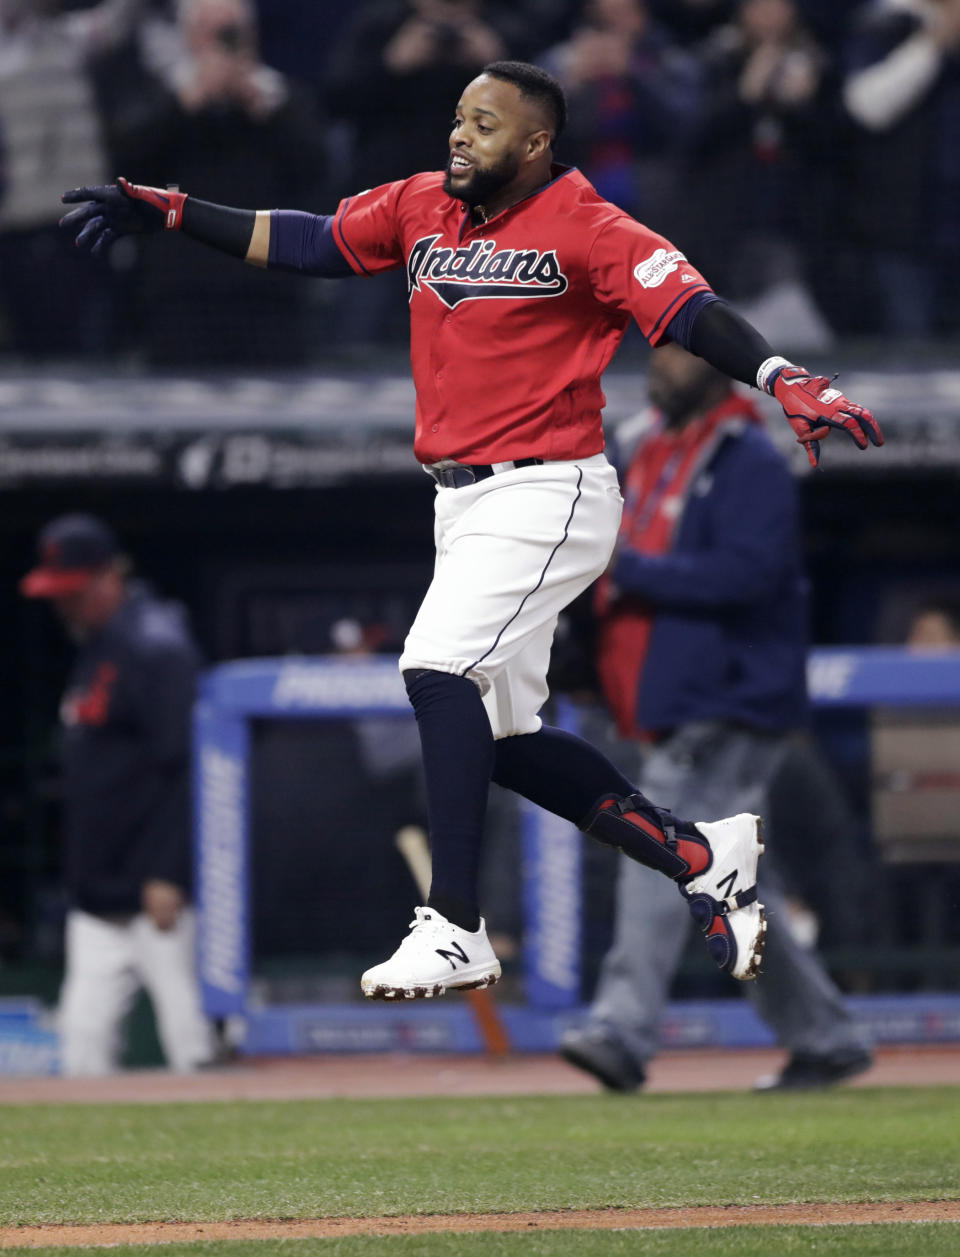 Cleveland Indians' Carlos Santana celebrates after hitting a solo home run off Toronto Blue Jays relief pitcher Joe Biagini during the ninth inning of a baseball game Friday, April 5, 2019, in Cleveland. The Indians won 3-2. (AP Photo/Tony Dejak)